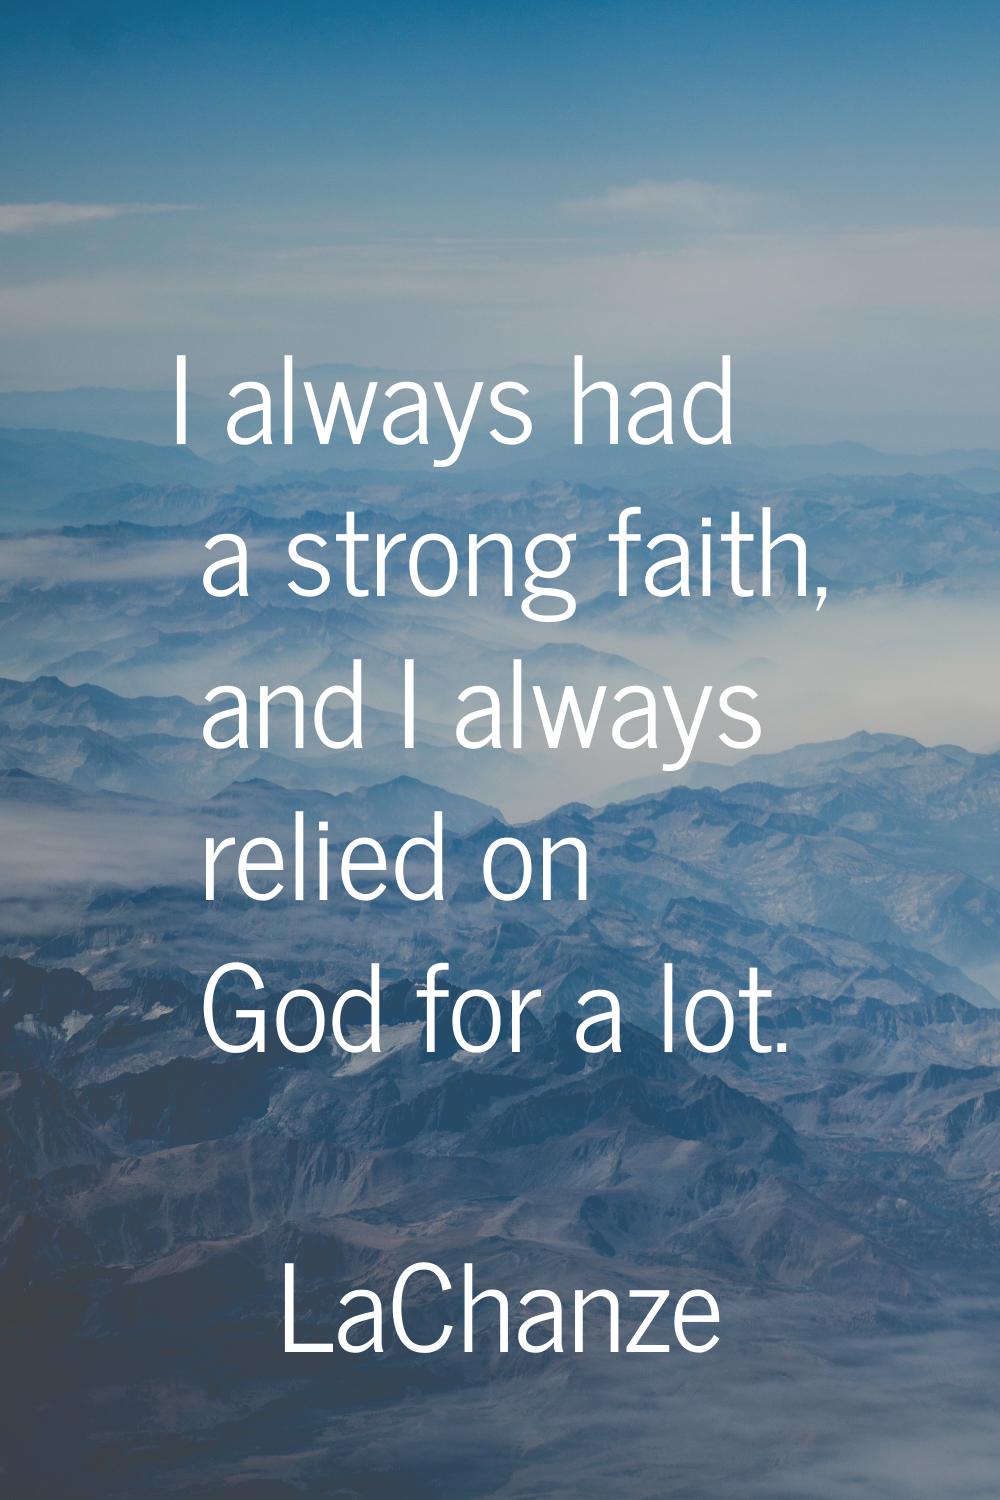 I always had a strong faith, and I always relied on God for a lot.